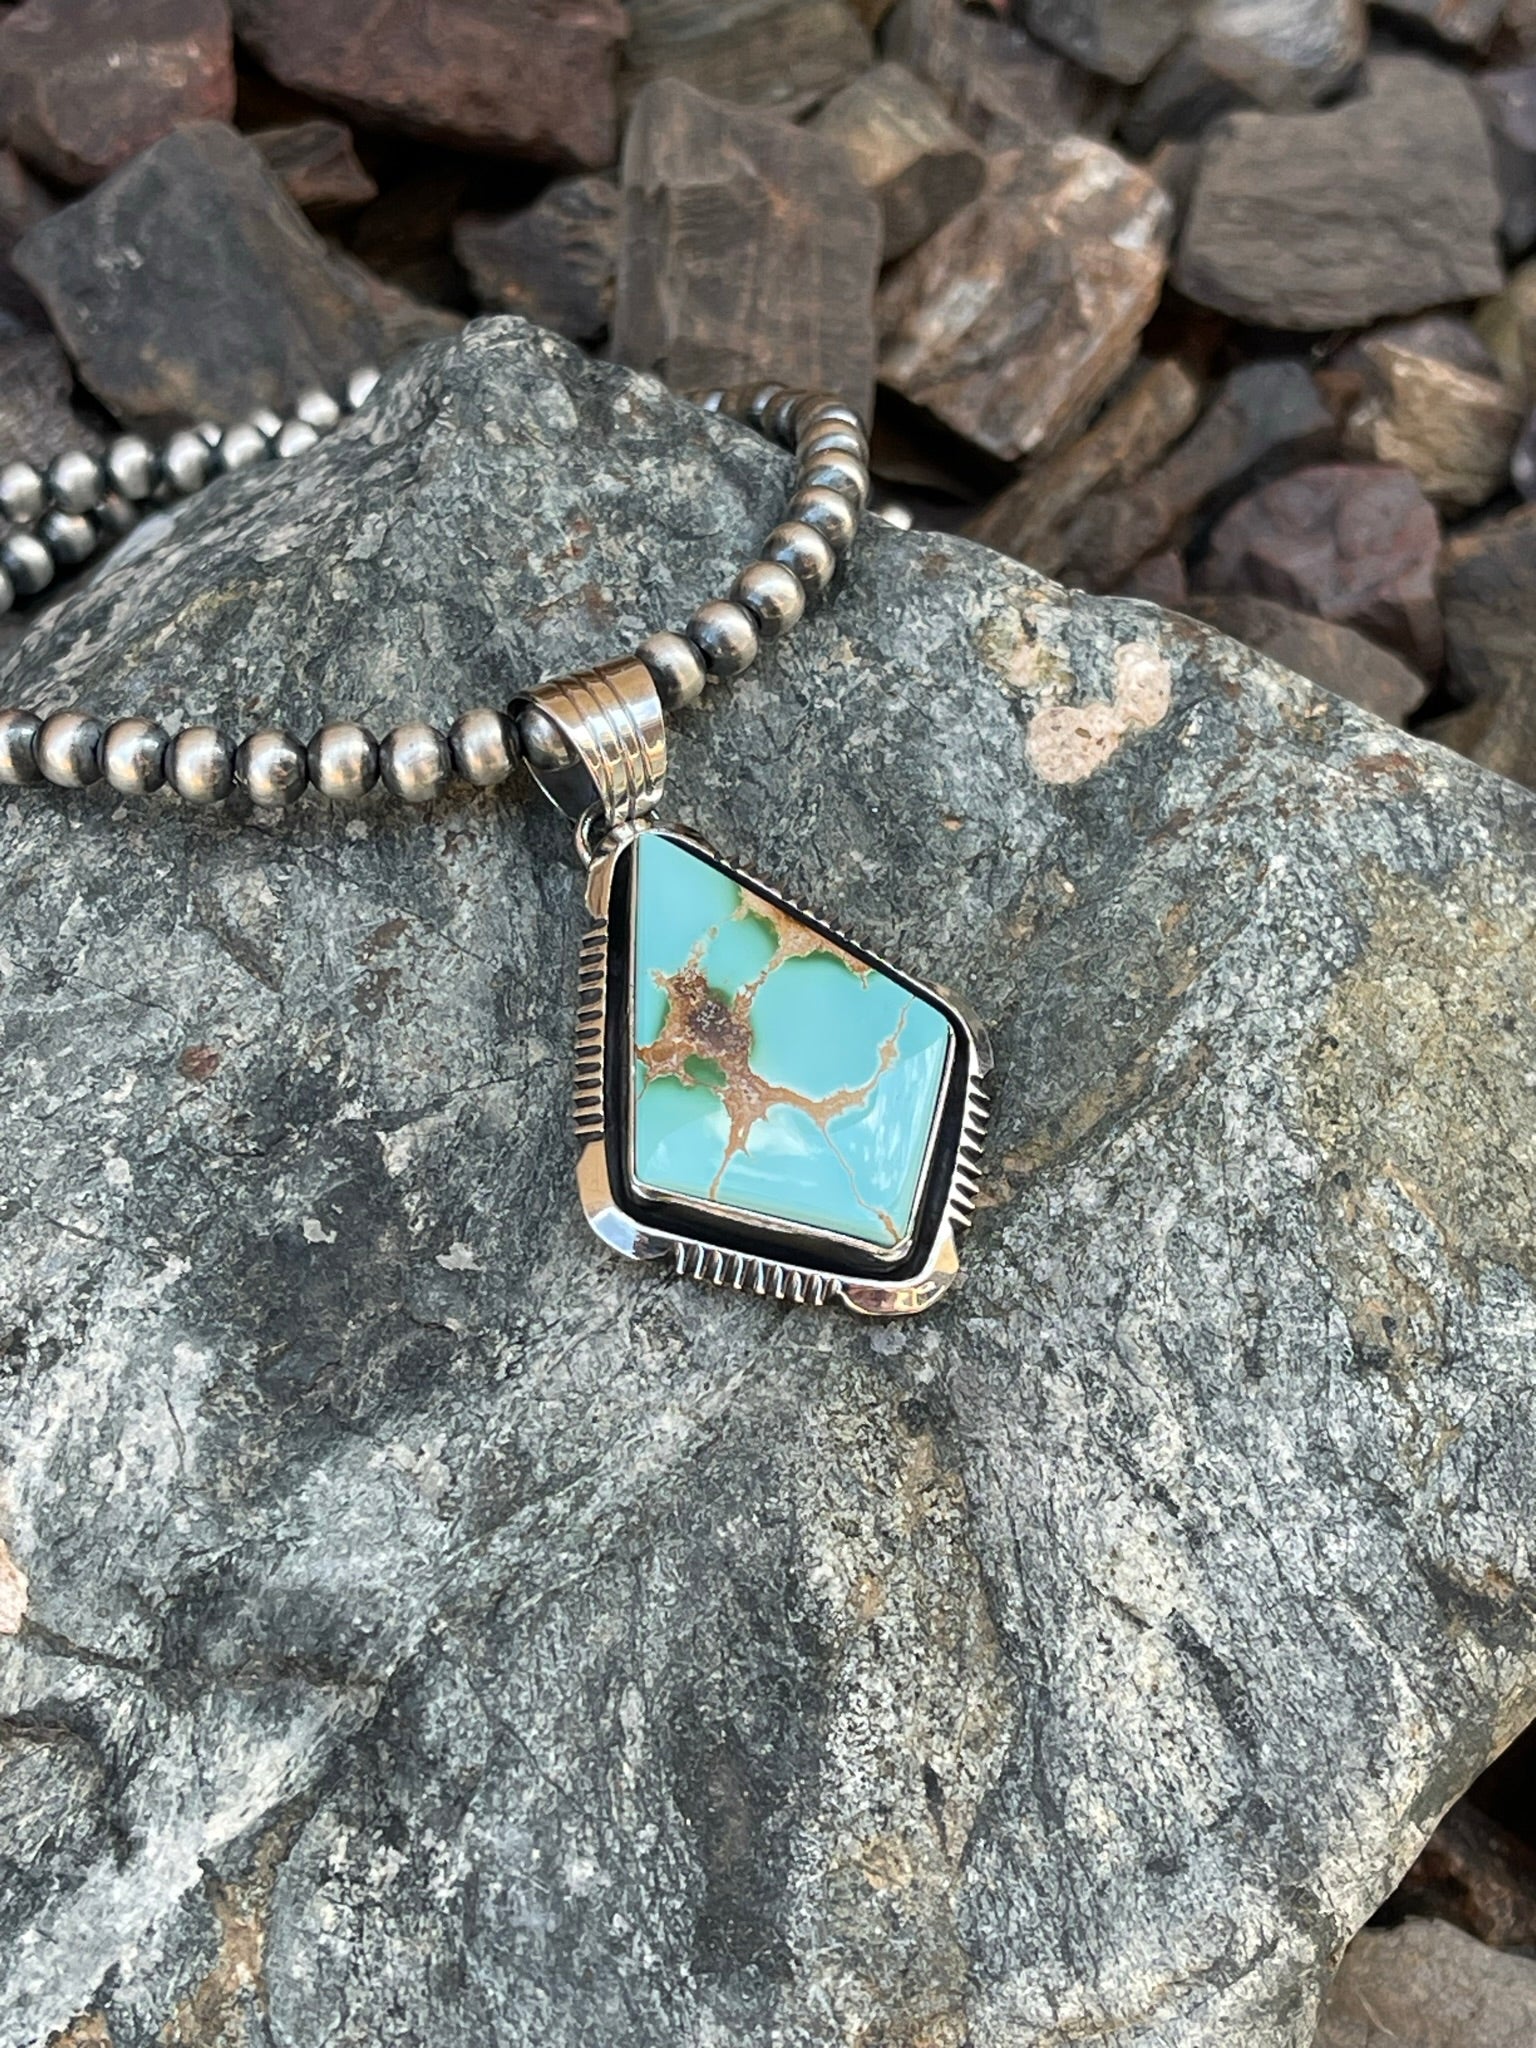 Handmade Solid Sterling Silver Royston Turquoise Pendant with Shadow Box Trim